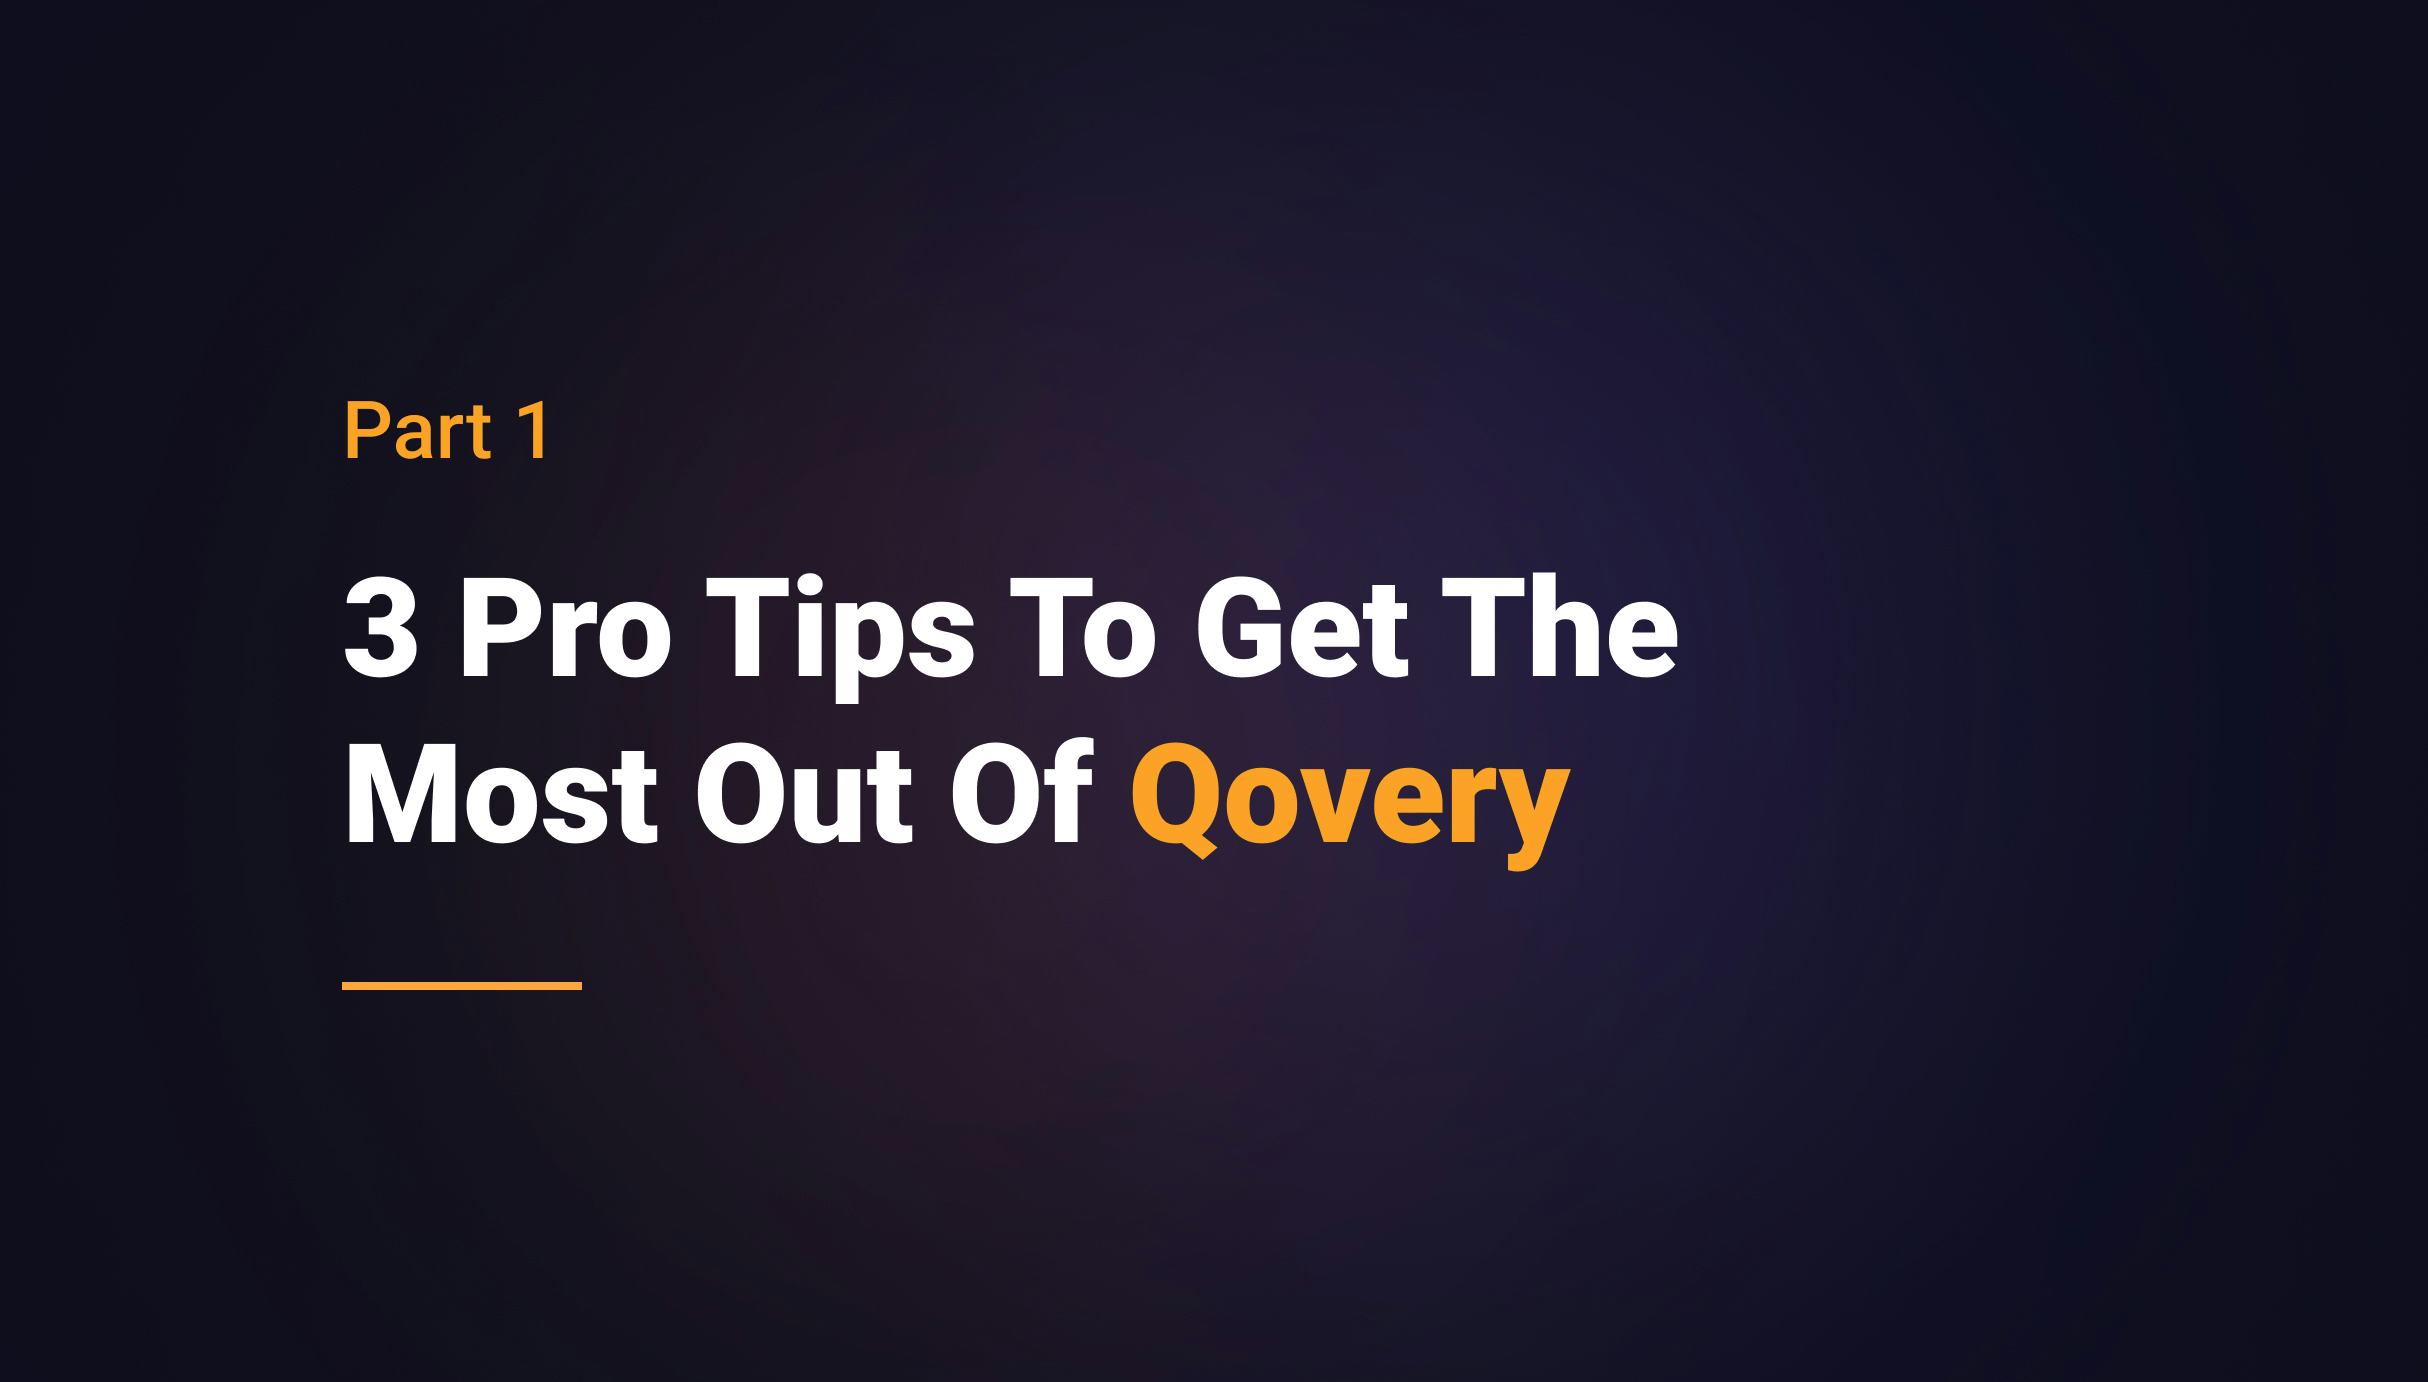 3 Pro Tips To Get The Most Out Of Qovery - Part 1 - Qovery